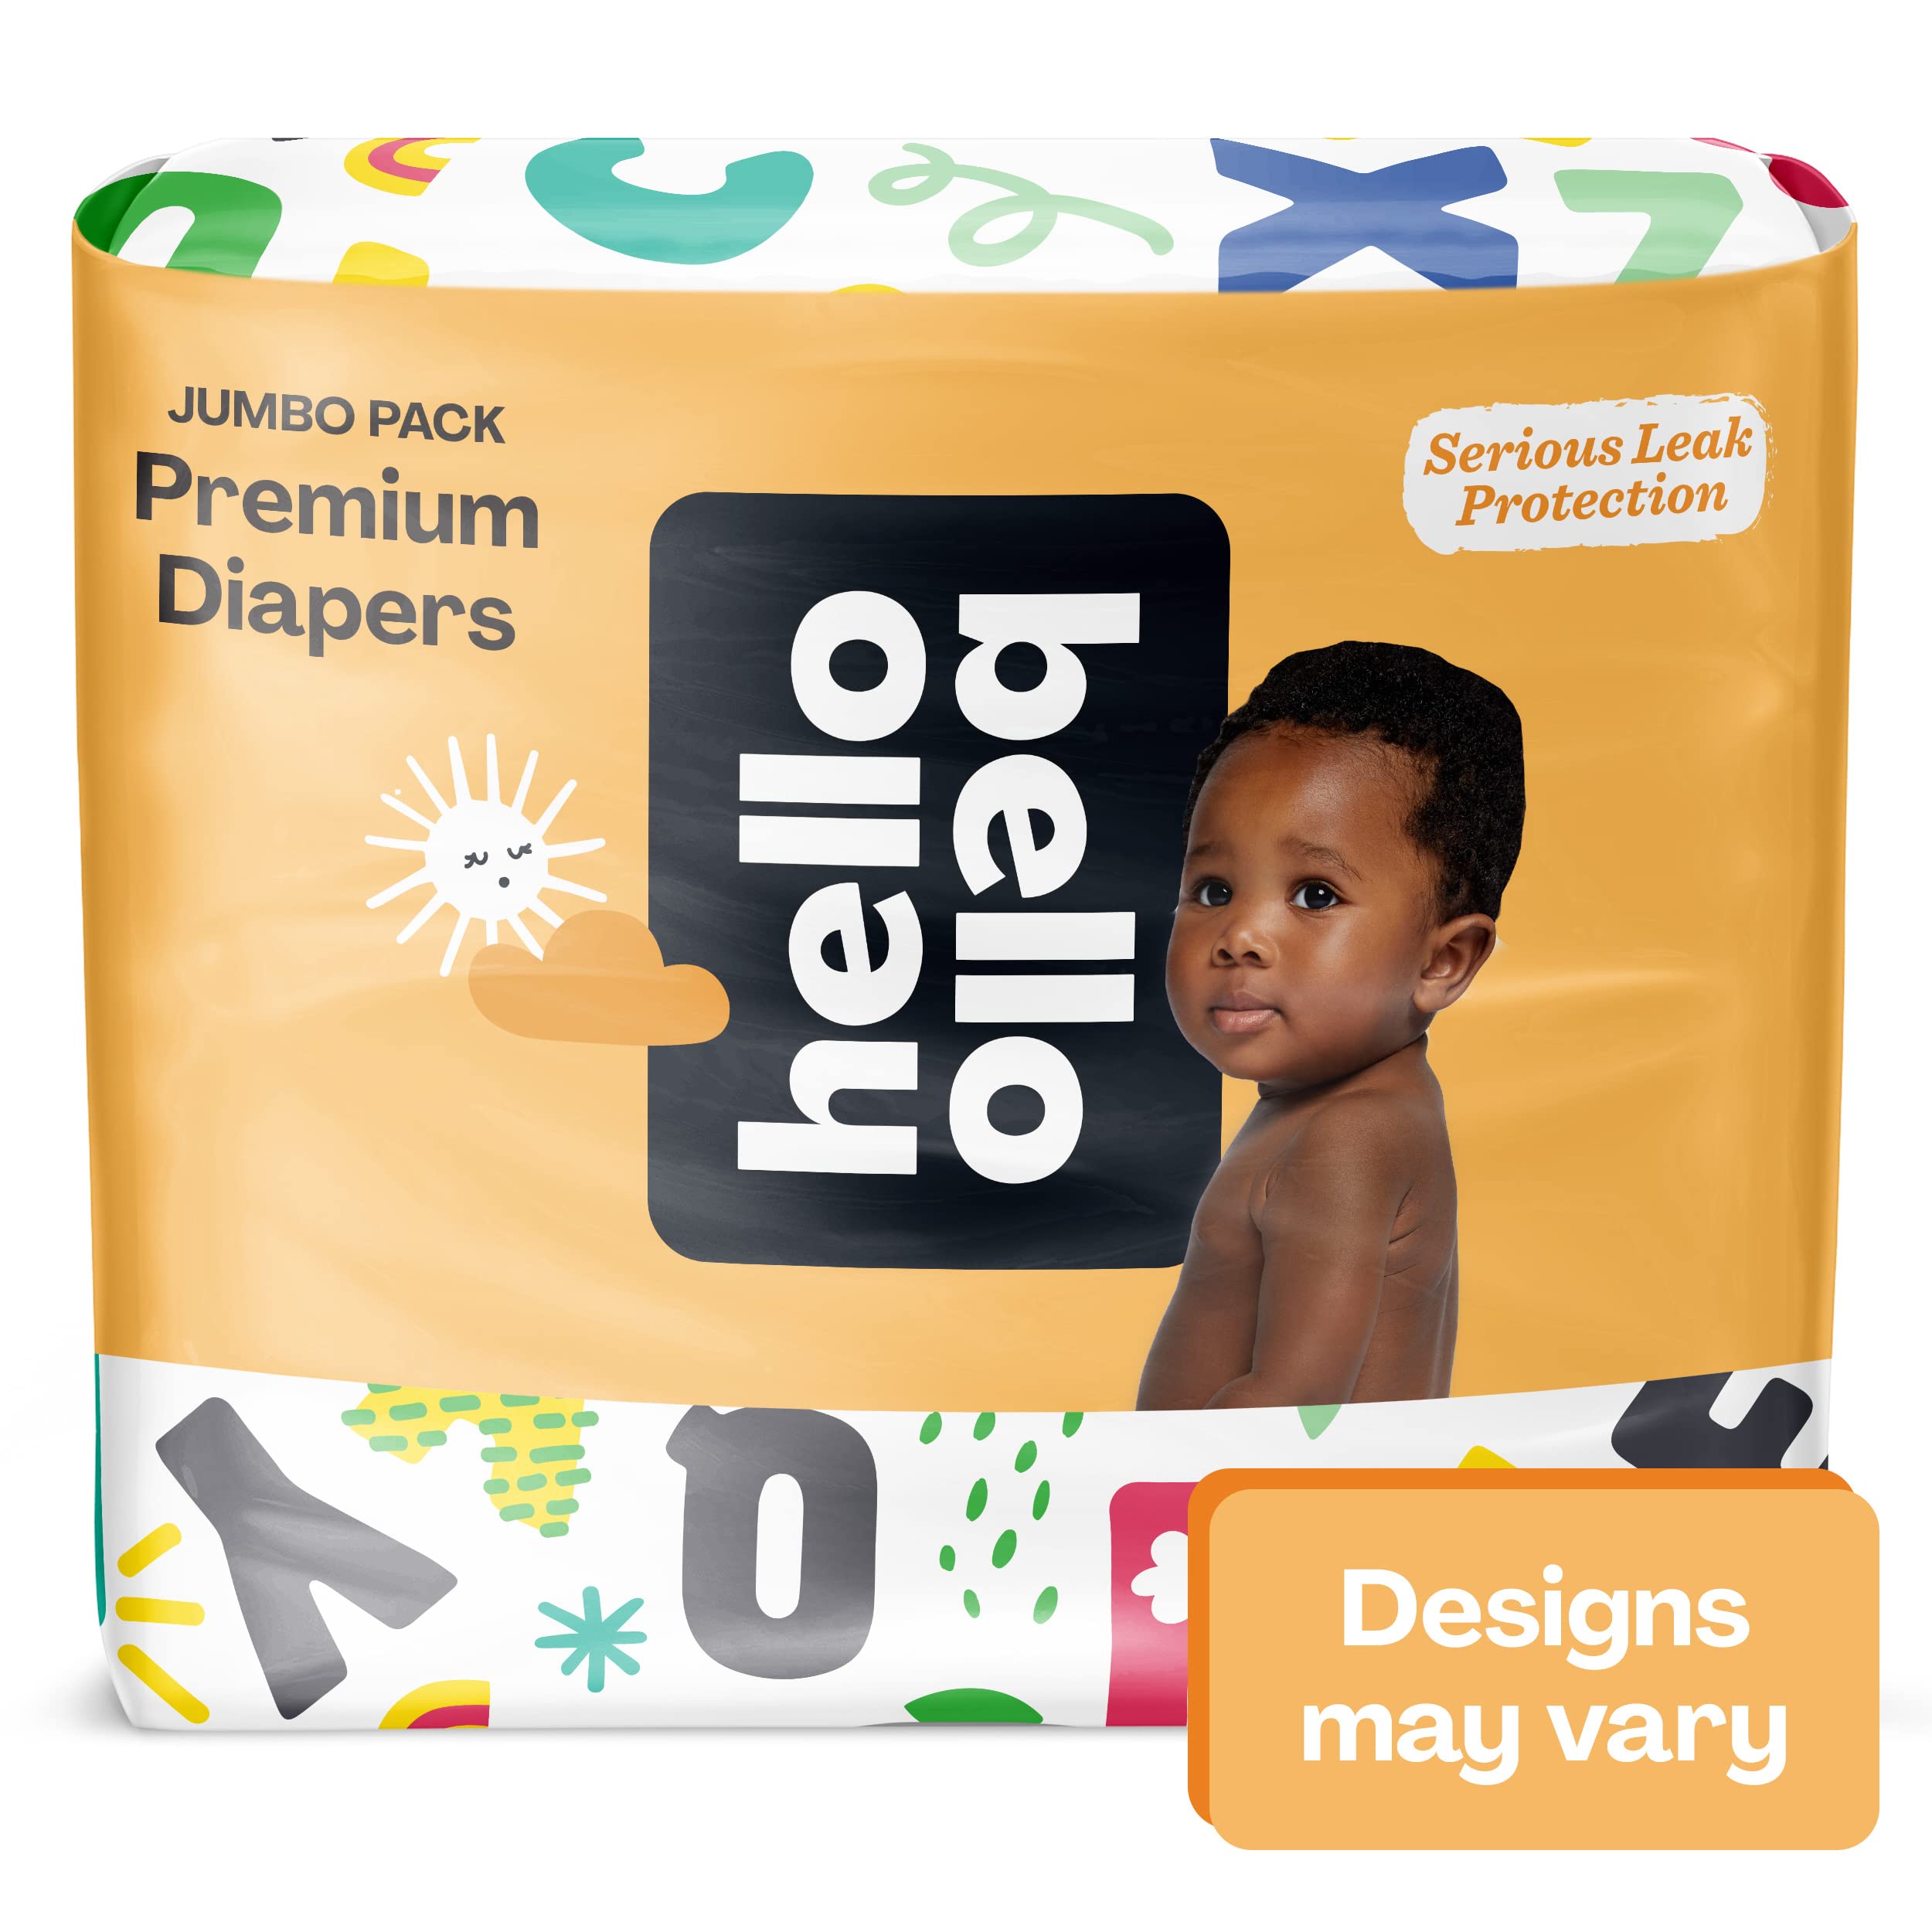 Hello Bello Premium Baby Diapers Size 2 I 120 Count of Disposable, Extra-Absorbent, Hypoallergenic, and Eco-Friendly Baby Diapers with Snug and Comfort Fit I Surprise Boy Patterns